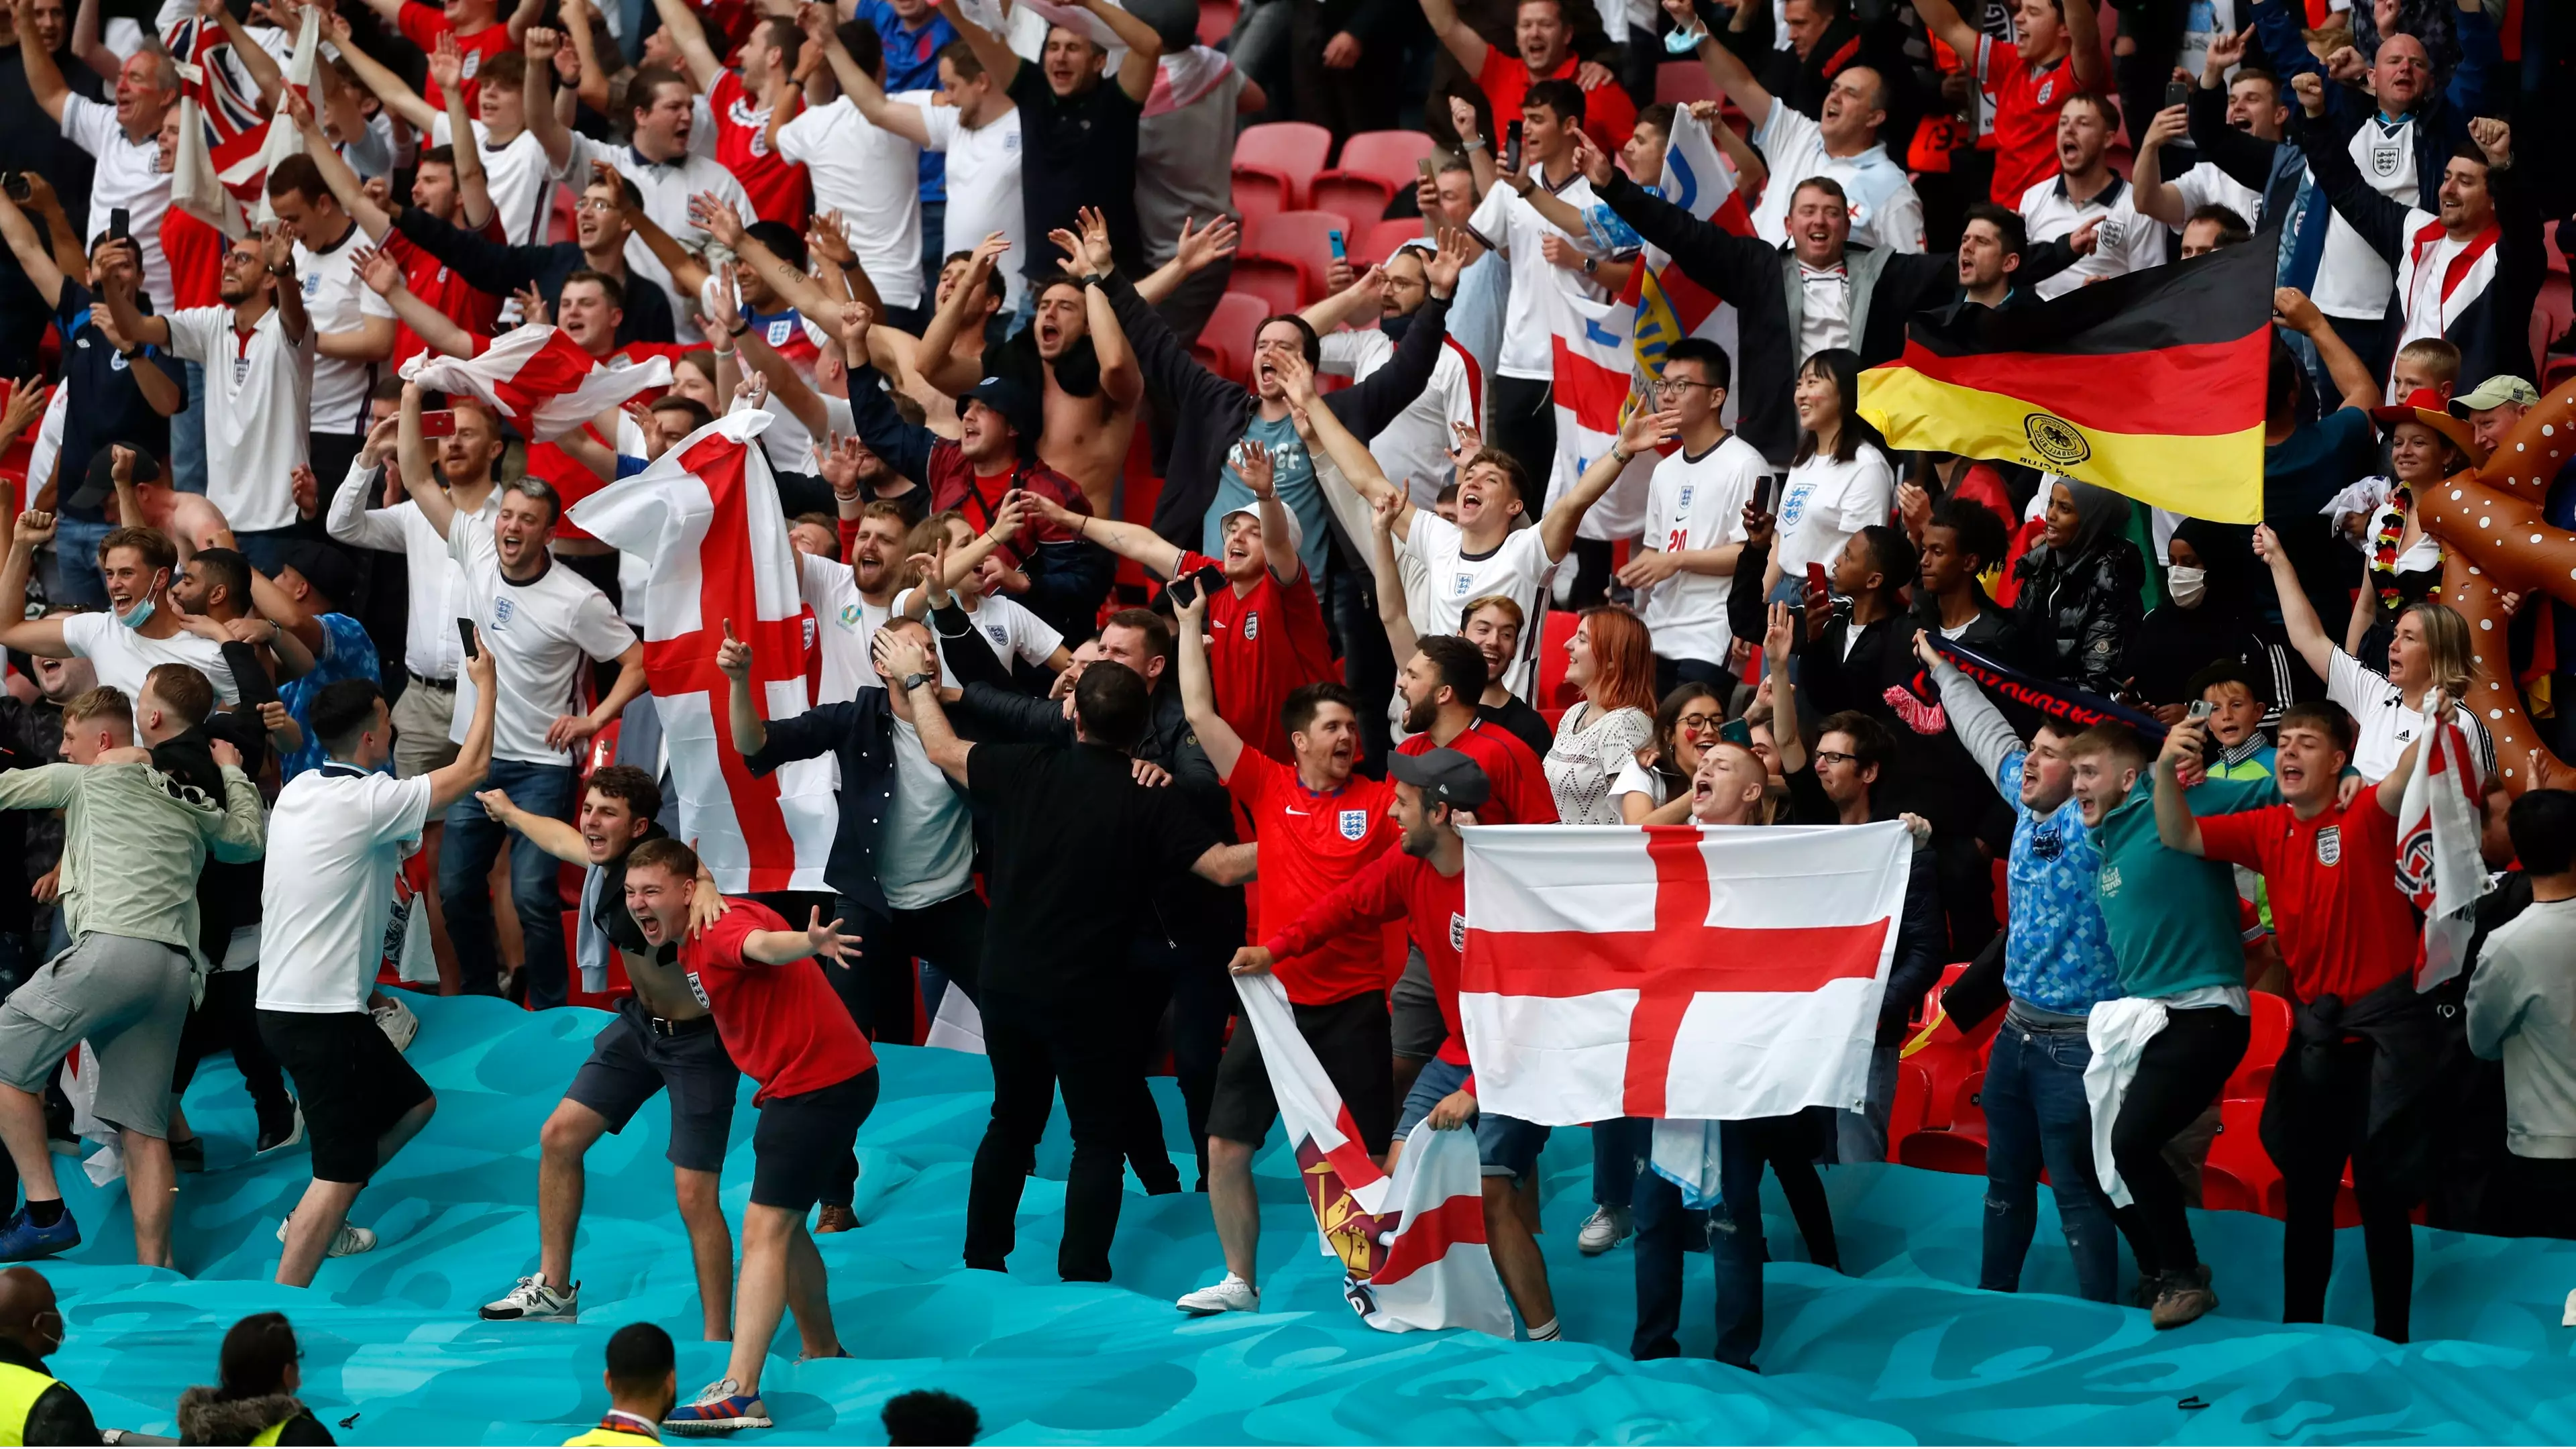 Unreal Scenes As England Fans Celebrate Historic Victory Over Germany